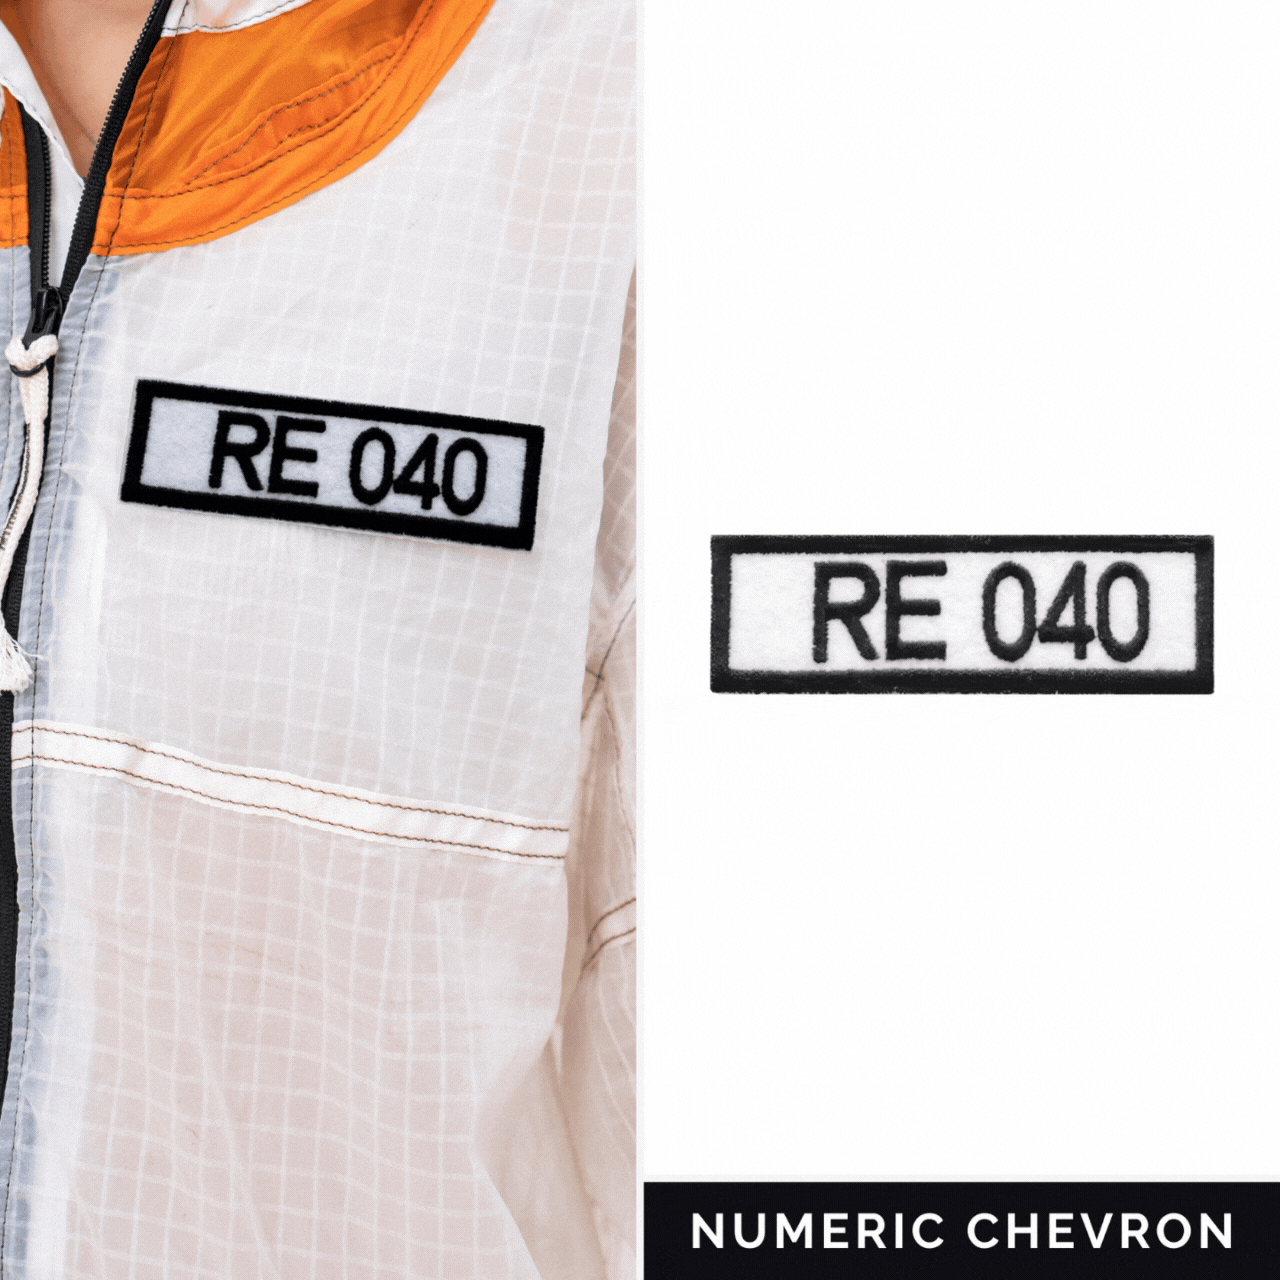 Numeric Chevron DEMILITARIZATION (comes as a gift with the purchase of a jacket or poncho DEMILITARIZATION)